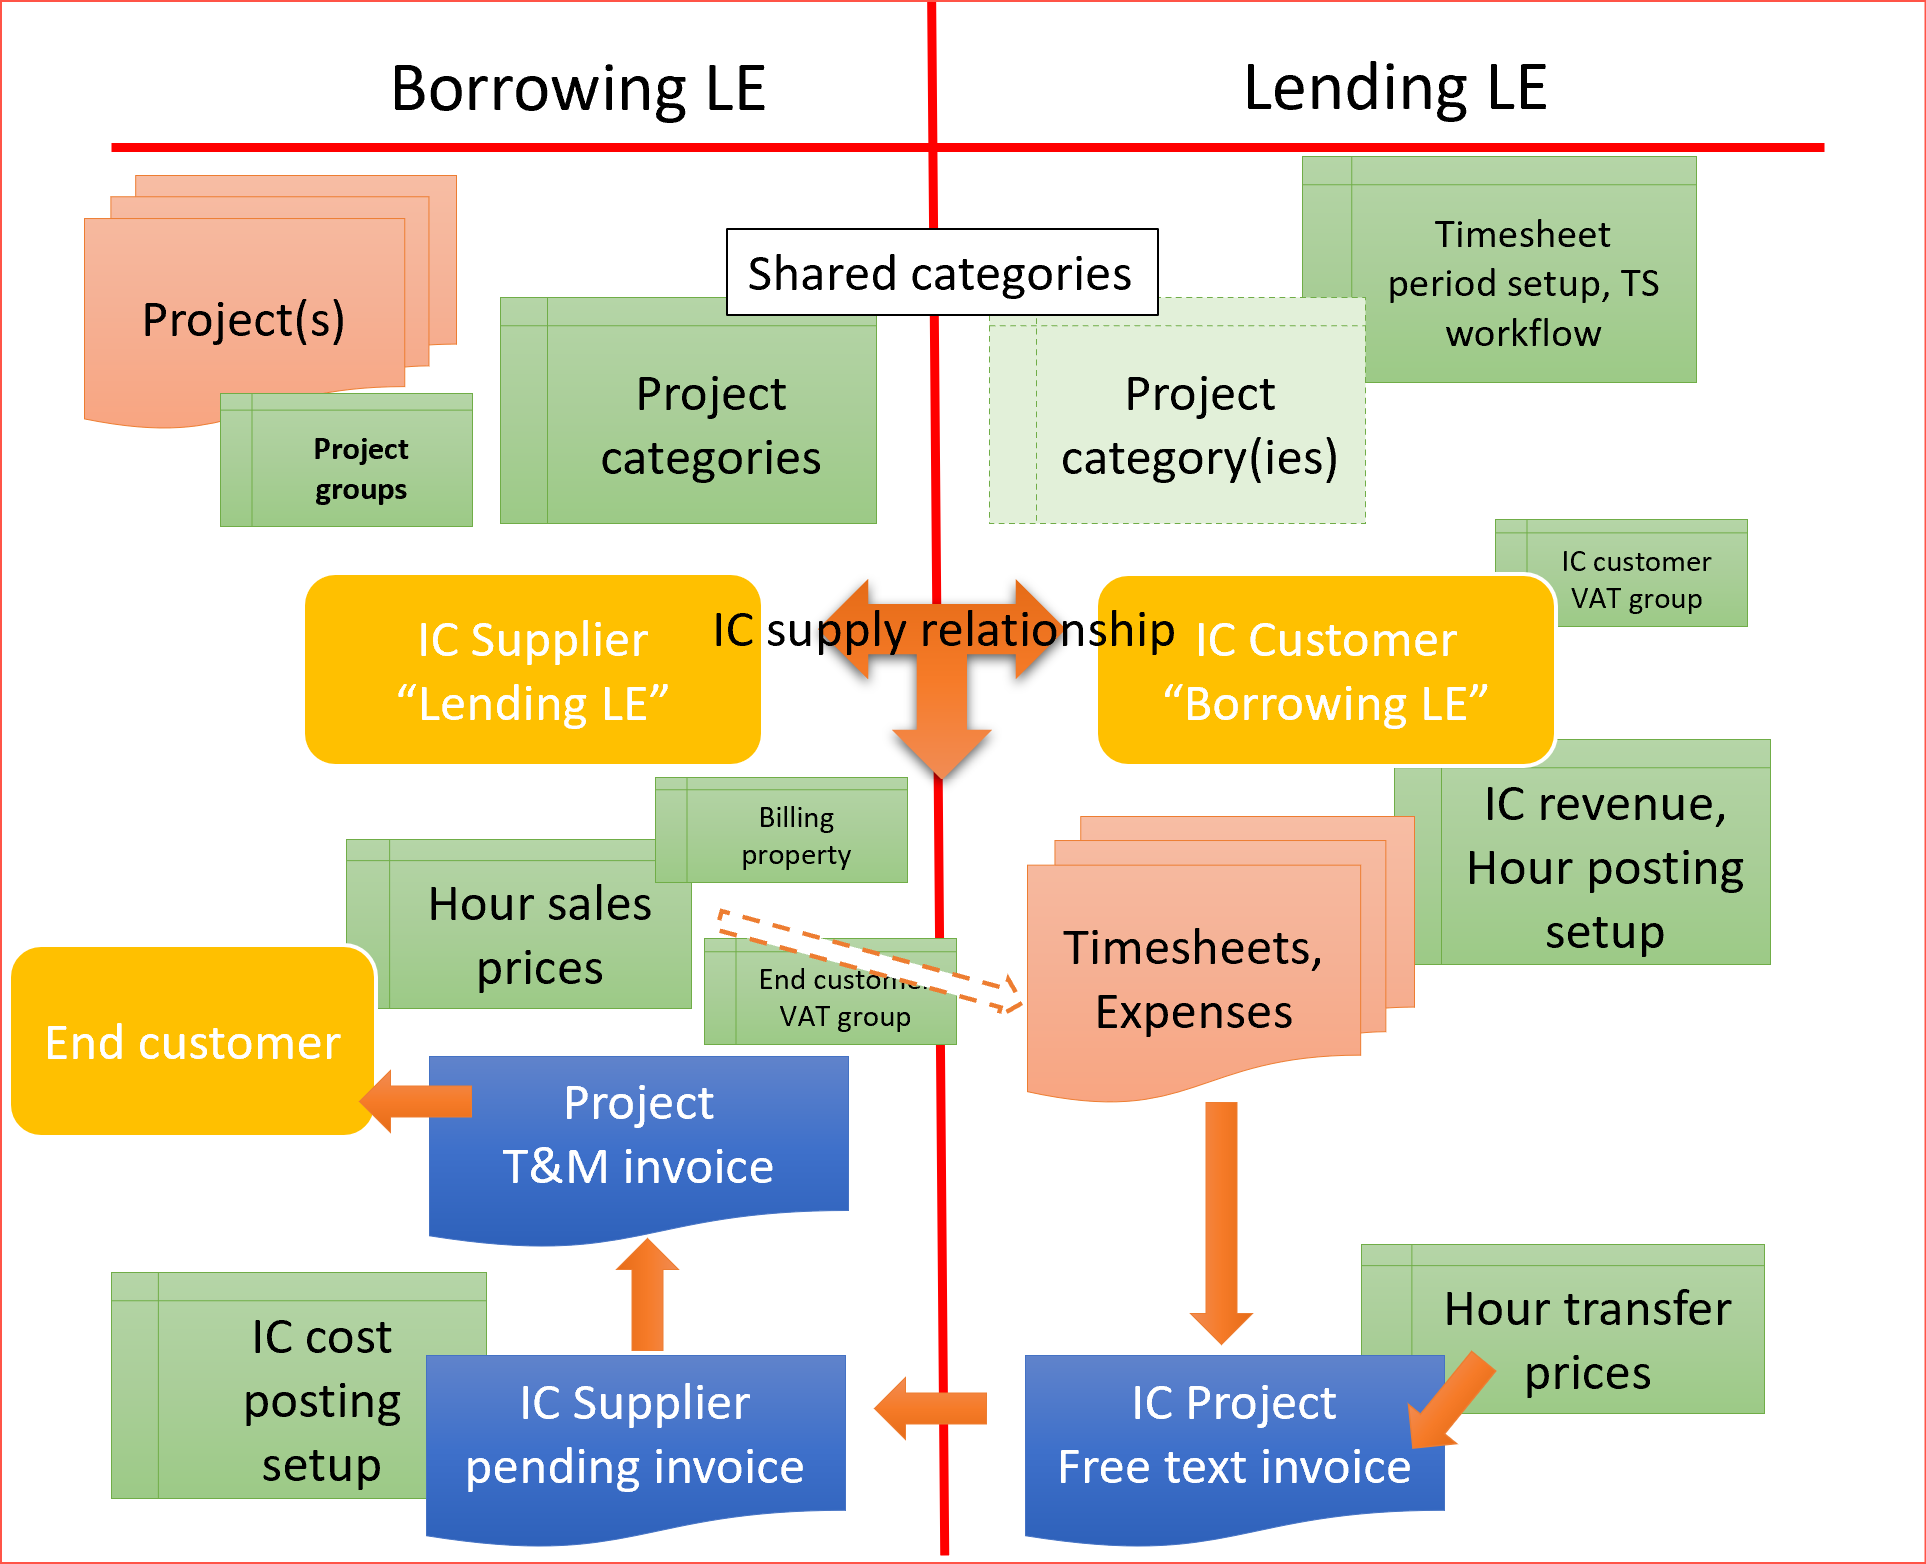  The image displays a table with information about the structure and content of a credit invoice letter. The table has two columns, one for the borrowing LE and one for the lending LE. The borrowing LE column has information about the project, project groups, IC supplier "Lending LE", hour sales prices, project T&M invoice, IC cost posting setup, and IC supplier pending invoice. The lending LE column has information about the project category, timesheet period setup, TS workflow, IC customer VAT group, IC customer "Borrowing LE", IC revenue, hour posting setup, timesheets, expenses, hour transfer prices, and IC project free text invoice.